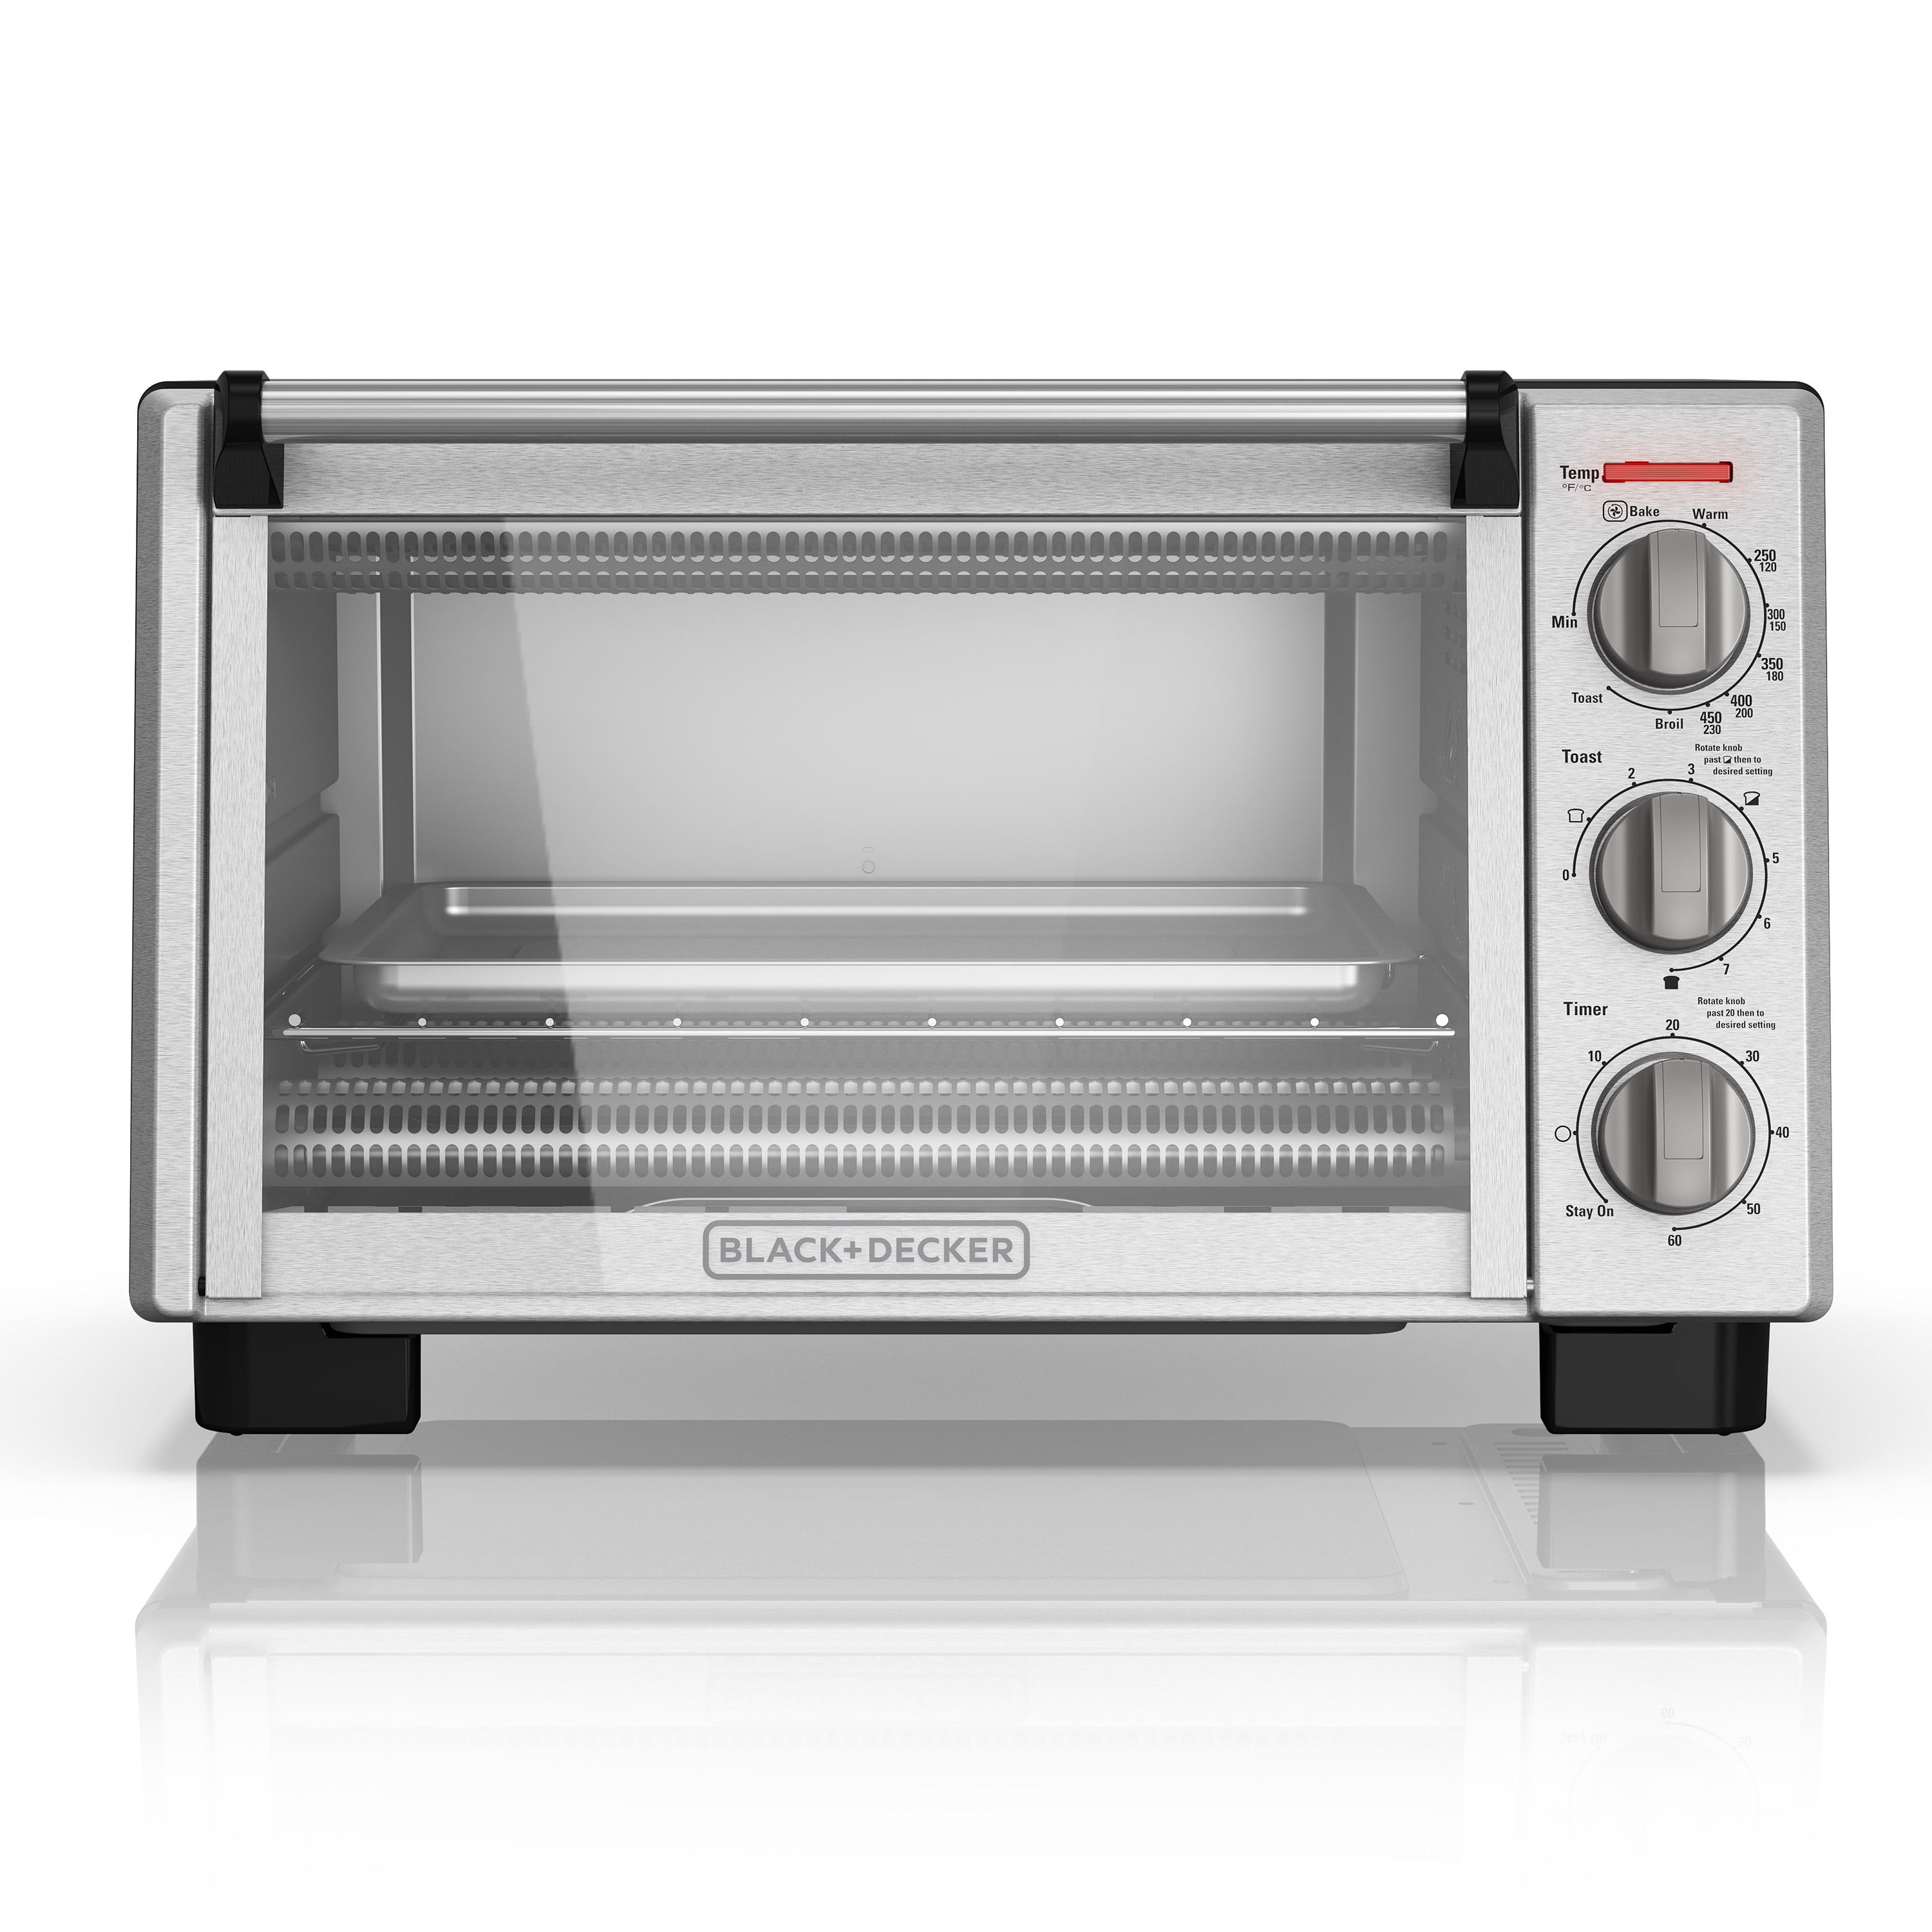 BLACK + DECKER 6-Slice 1500W Convection Toaster Oven - TO3000G